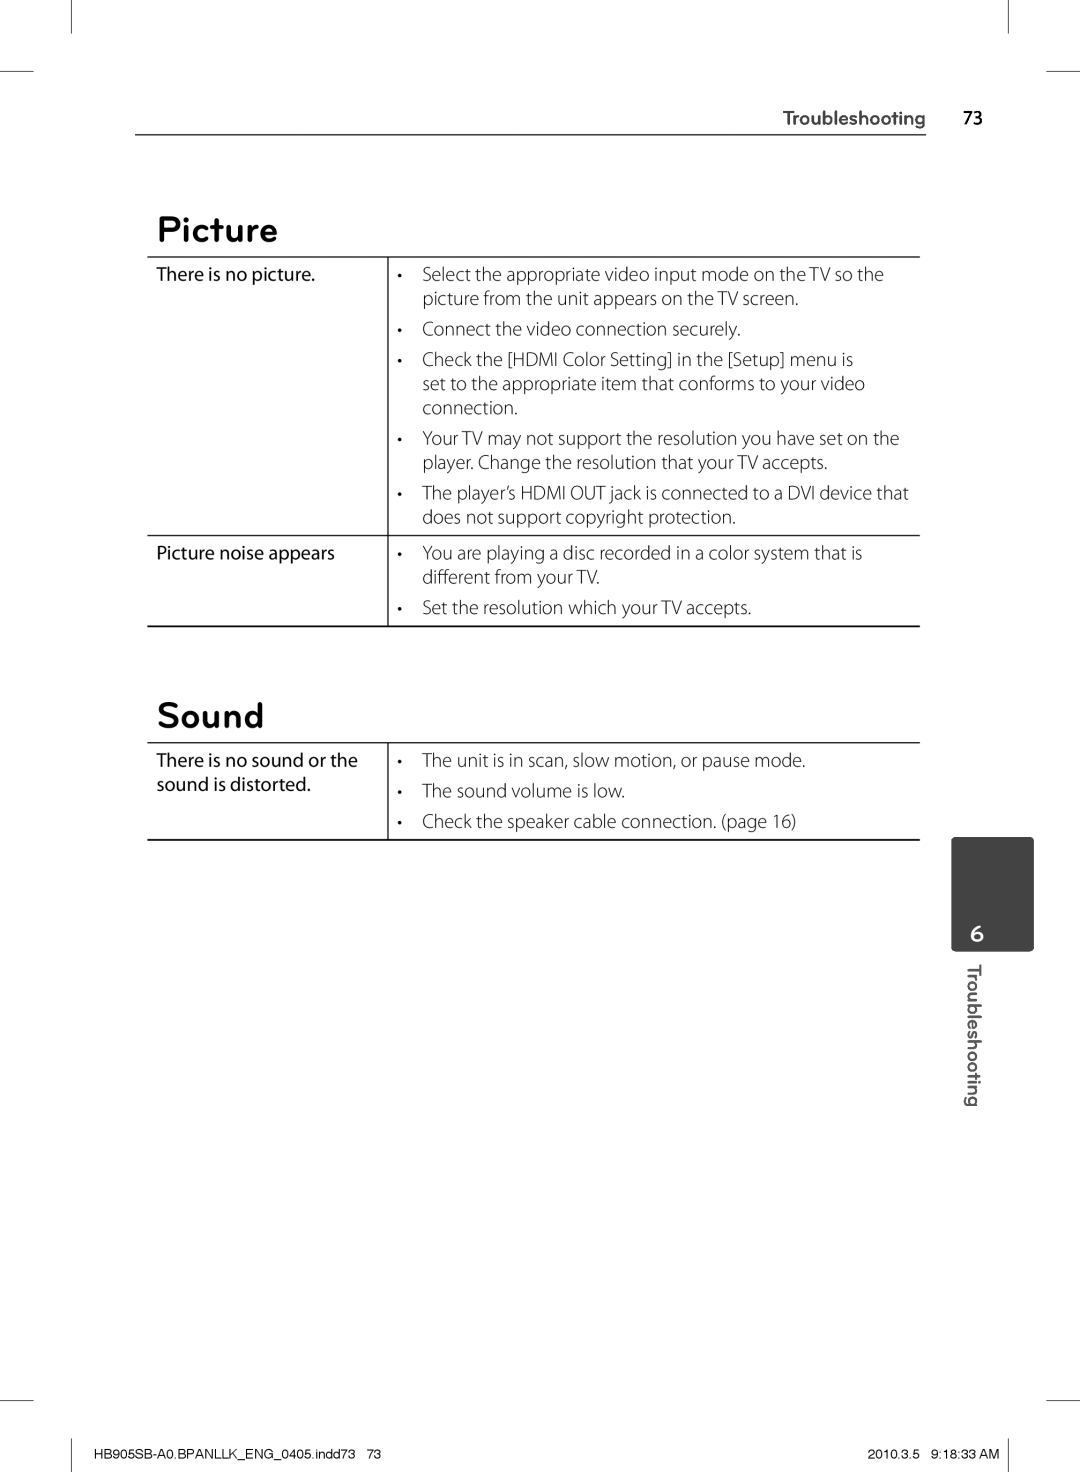 LG Electronics HB905SB owner manual Picture, Sound, Troubleshooting 